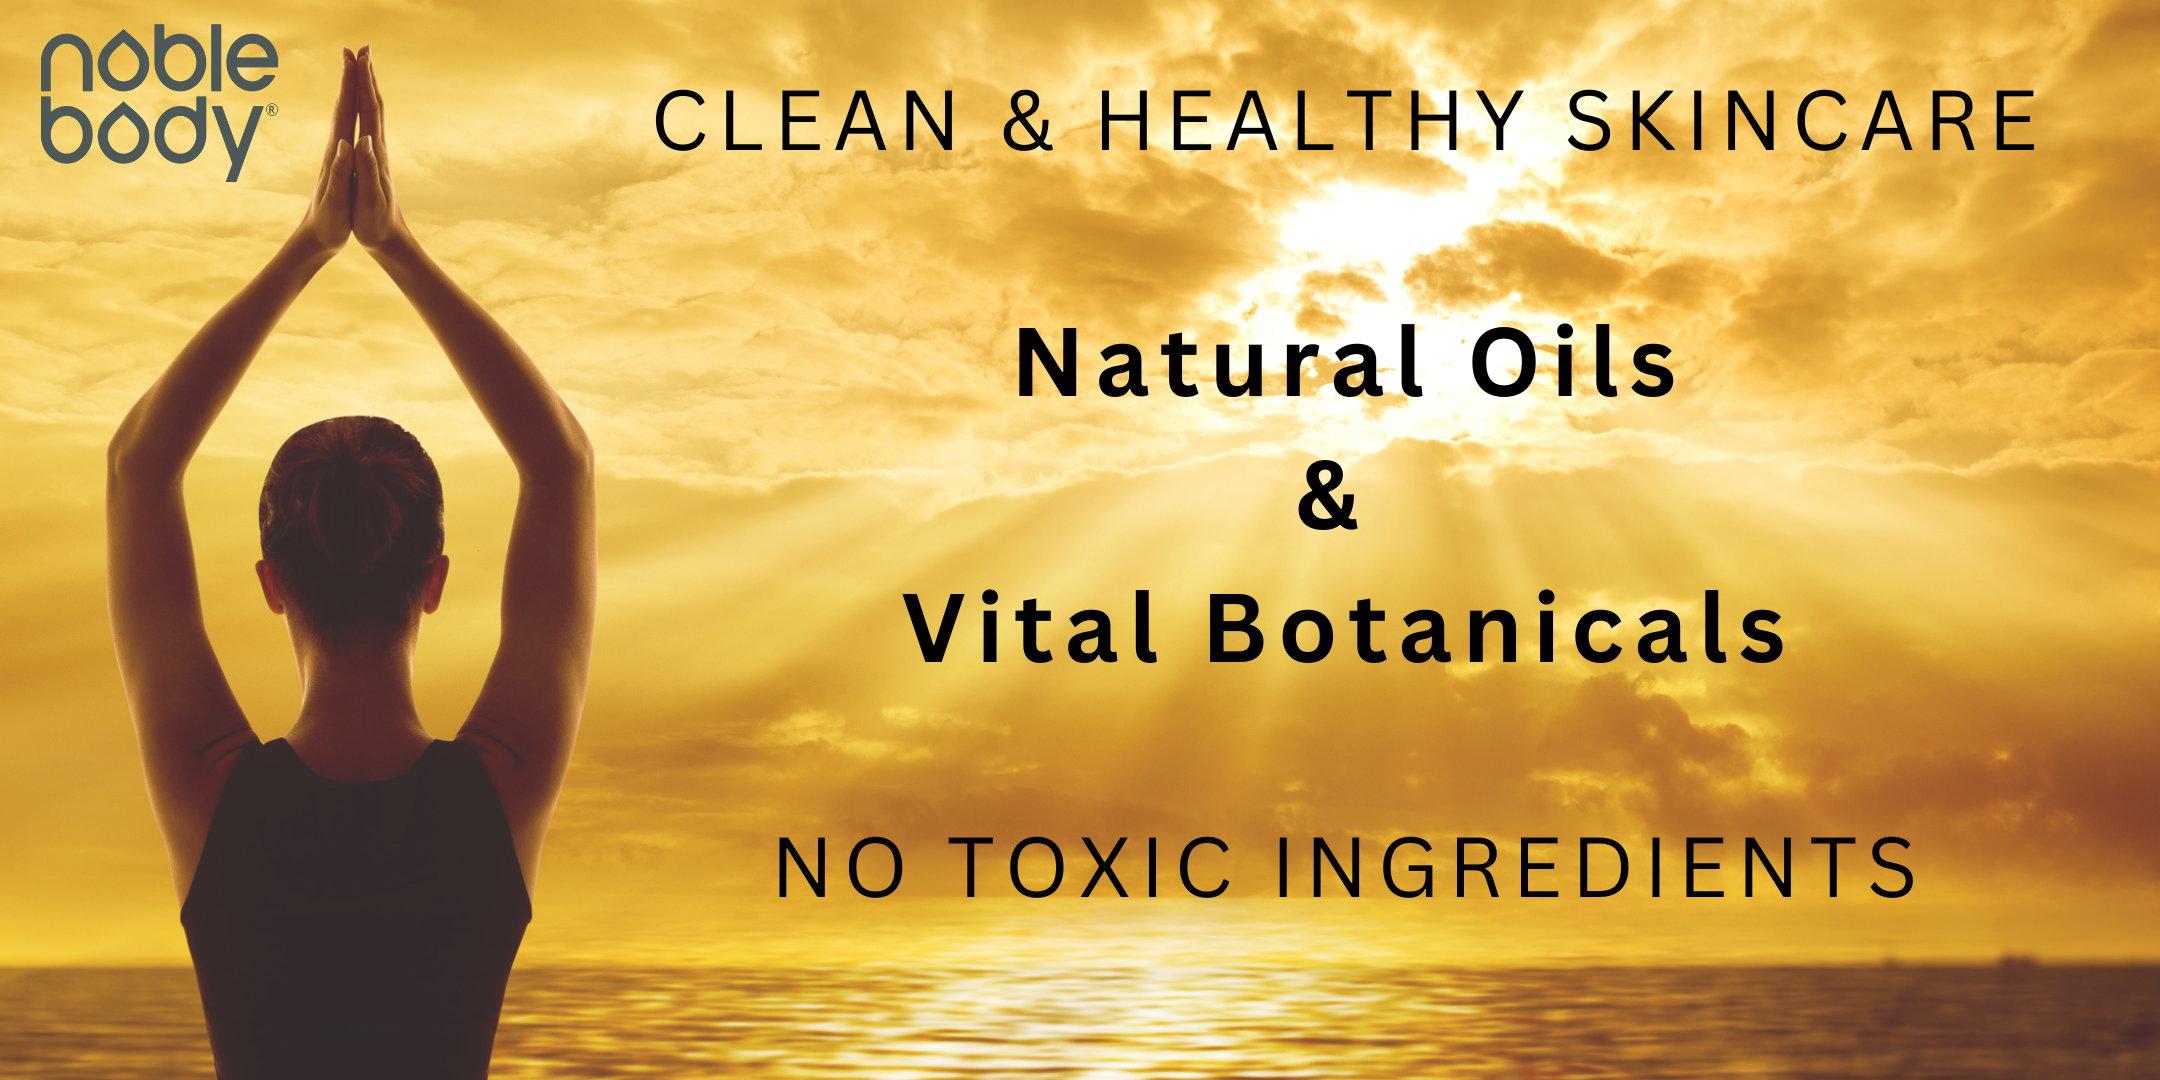 Woman on left side of photo in a yoga type pose with her back to the camera looking at a golden, cloudy sun over a body of water. Text reads "clean & healthy skincare. Natural oils & vital botanicals. No toxic ingredients."